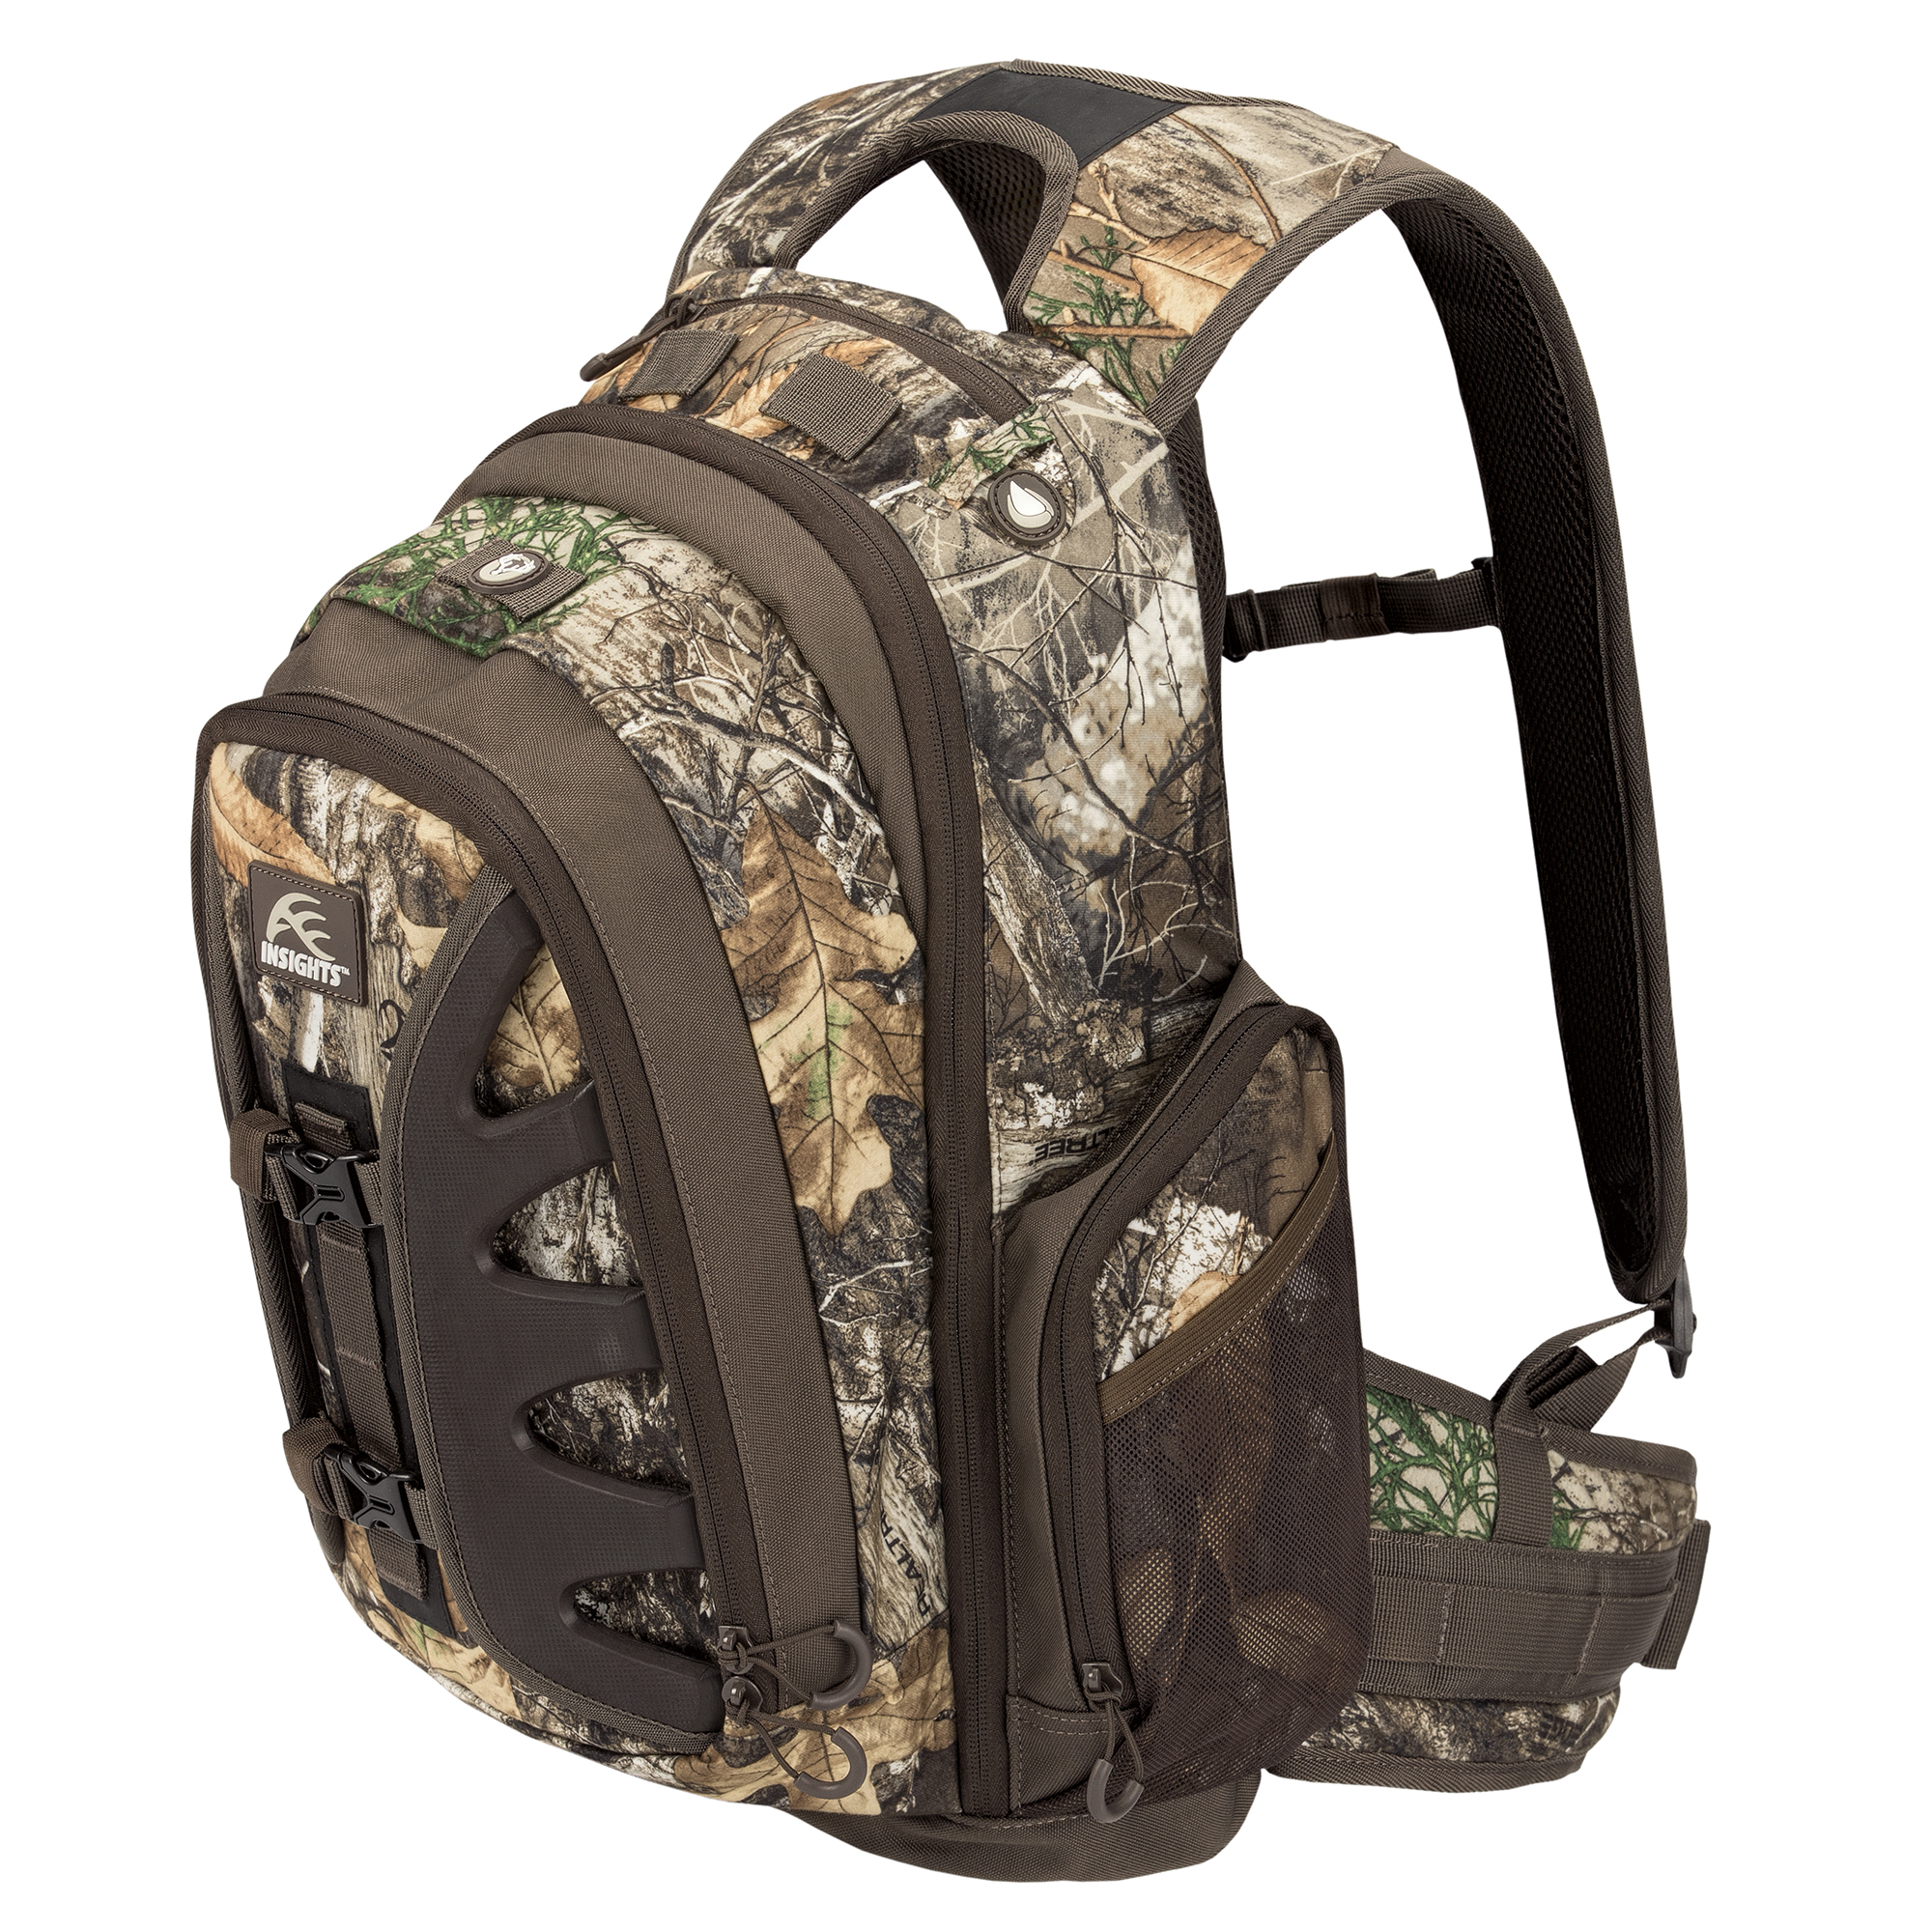 Insights 9301 The Element Outdoor Hiking Hunting Backpack, Realtree Edge Camo - image 1 of 9